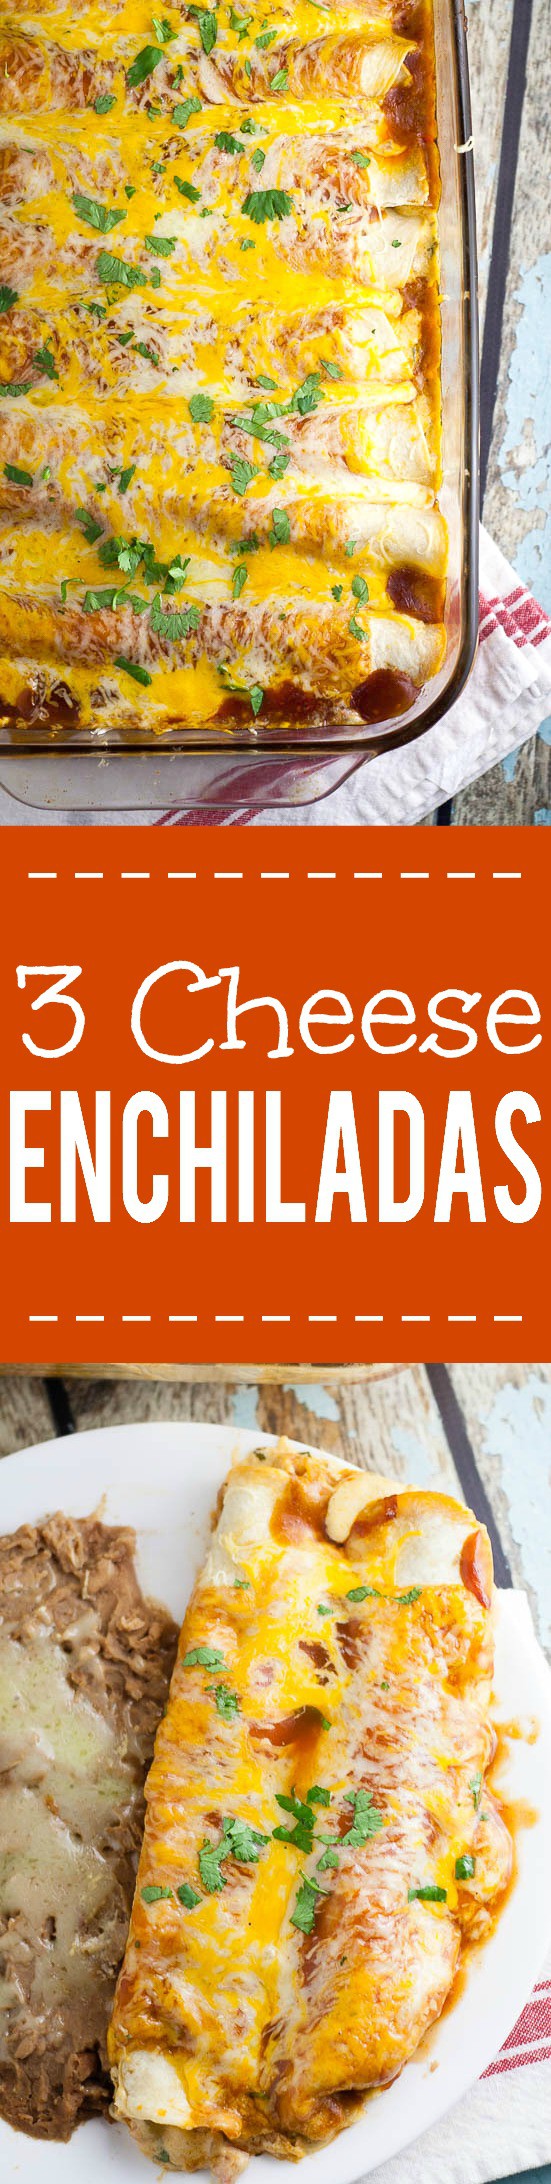 Three Cheese Enchiladas Recipe - Perfect for a meatless Monday vegitarian dinner recipe and a cheese lover's dream, these Three Cheese Enchiladas are filled with cheese, smothered in enchilada sauce, and baked in the oven for a delicious family meal.